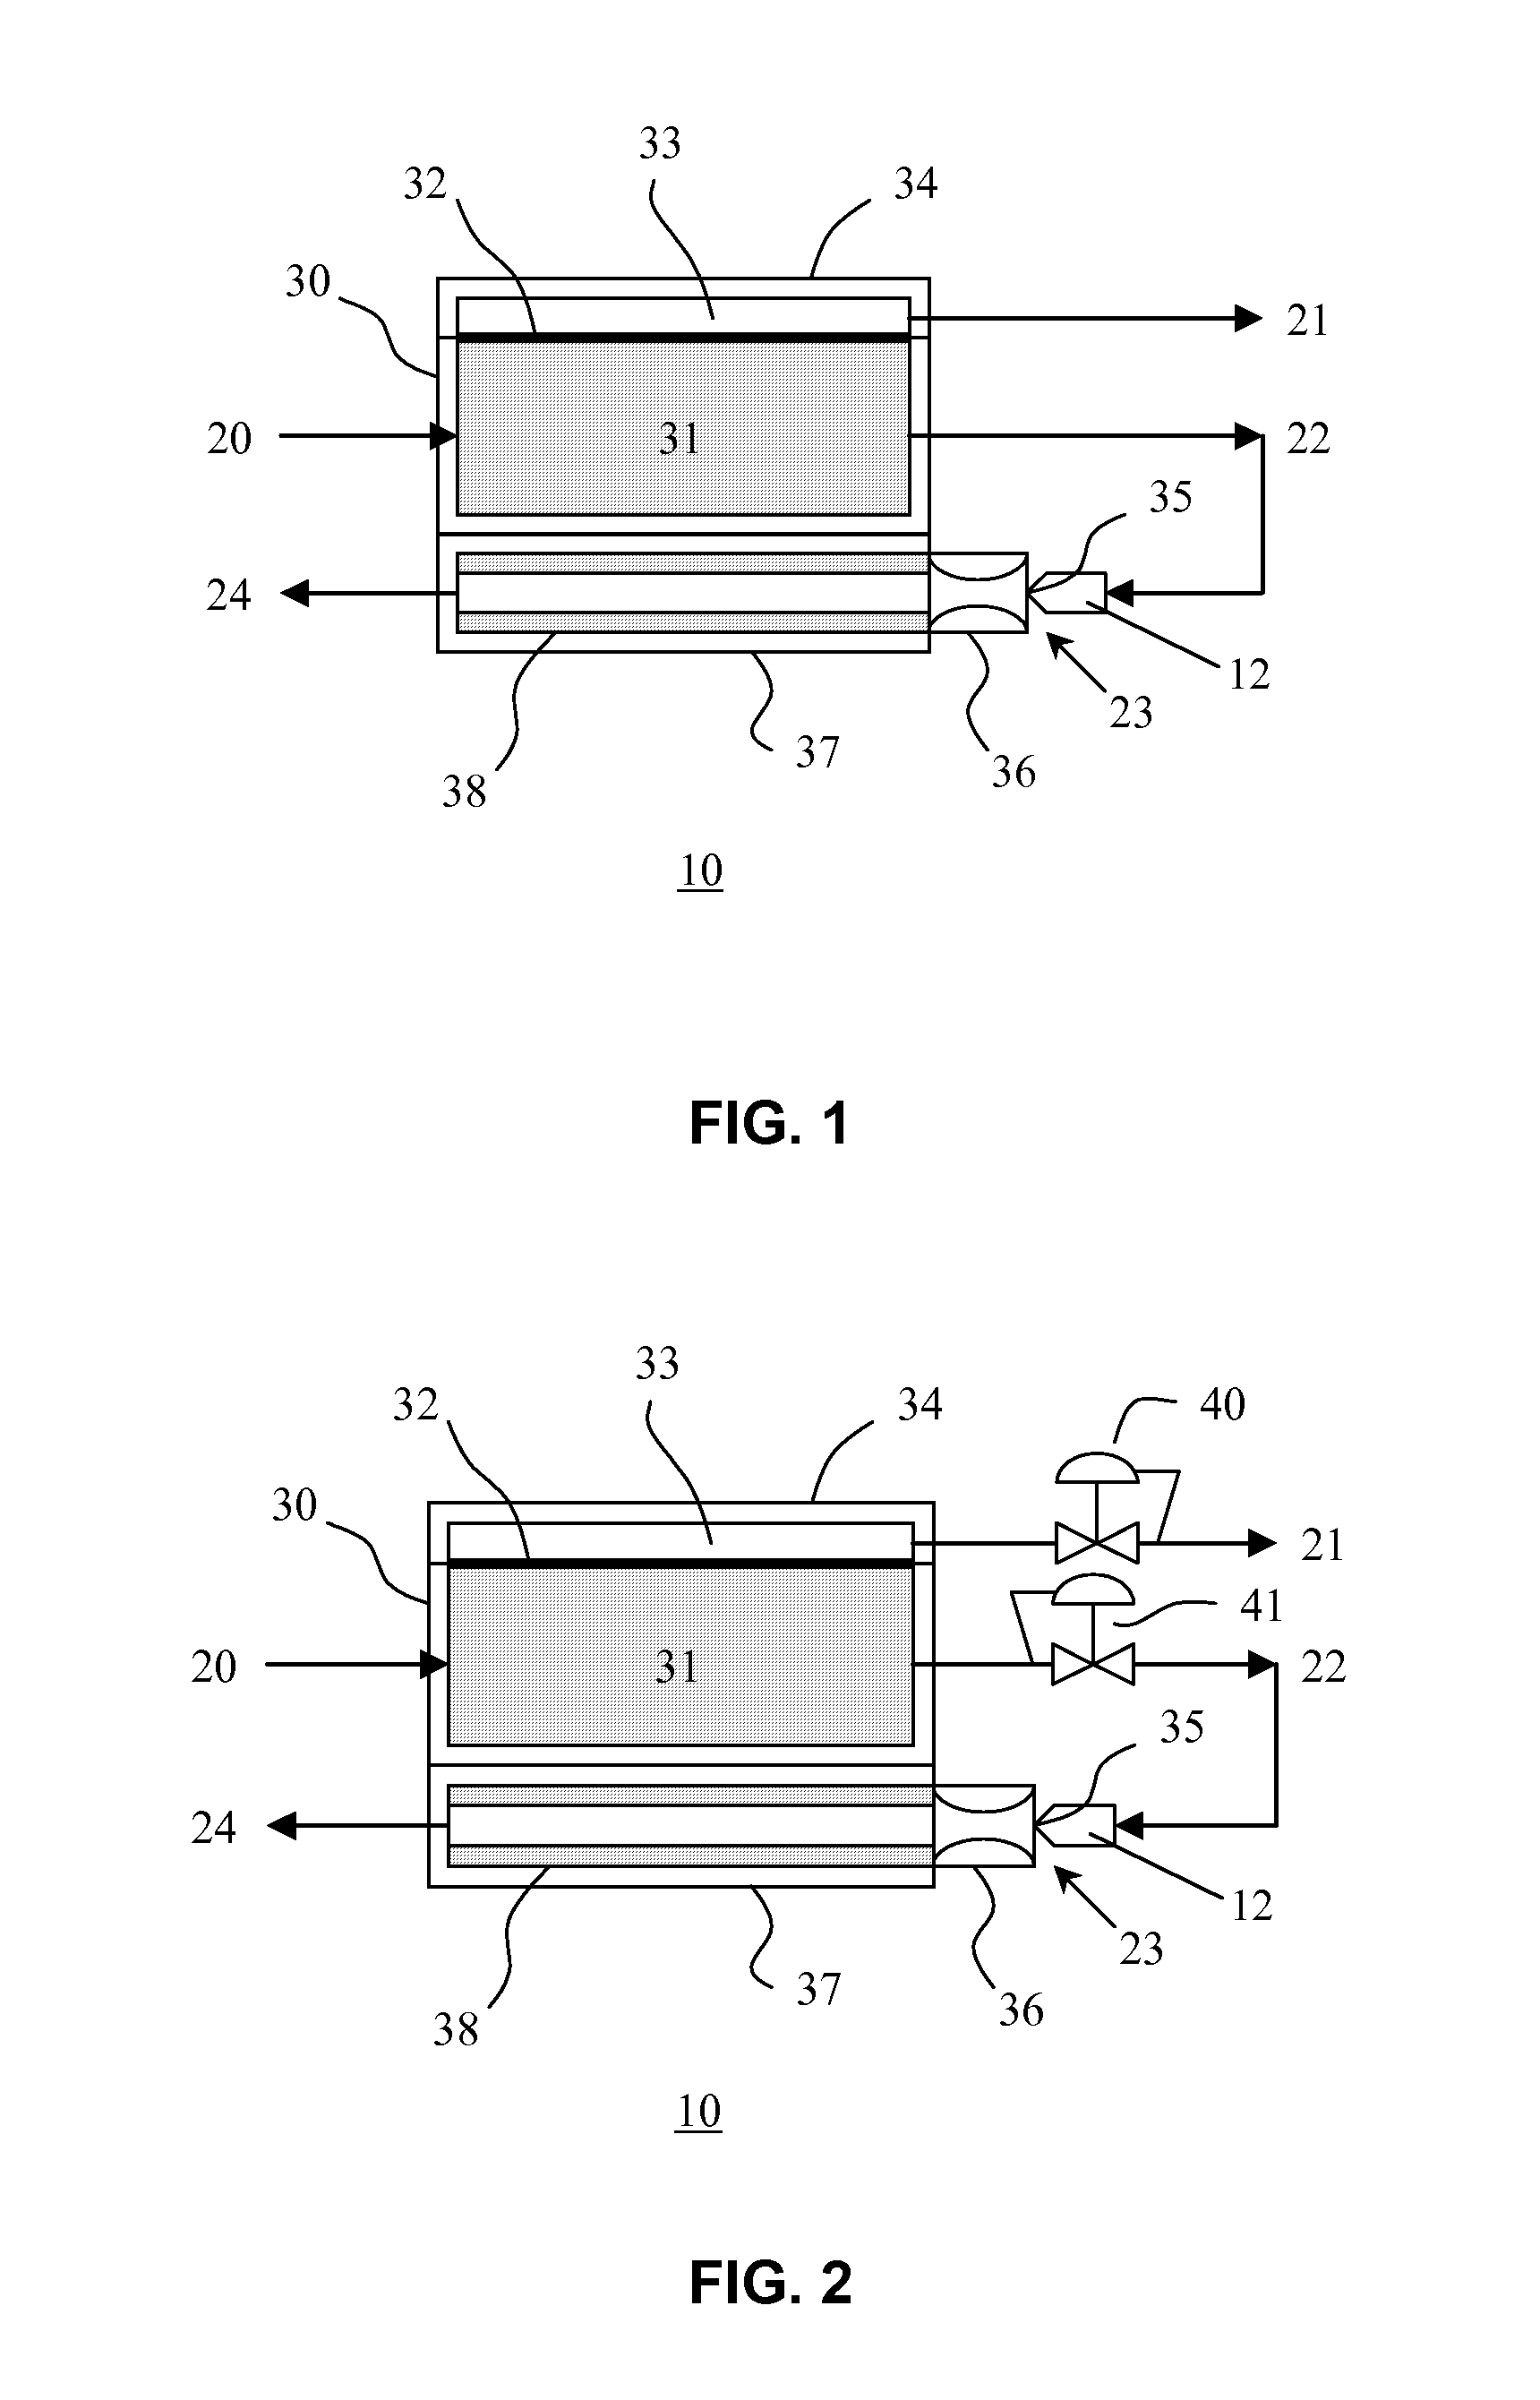 Method and Apparatus for Generating Hydrogen